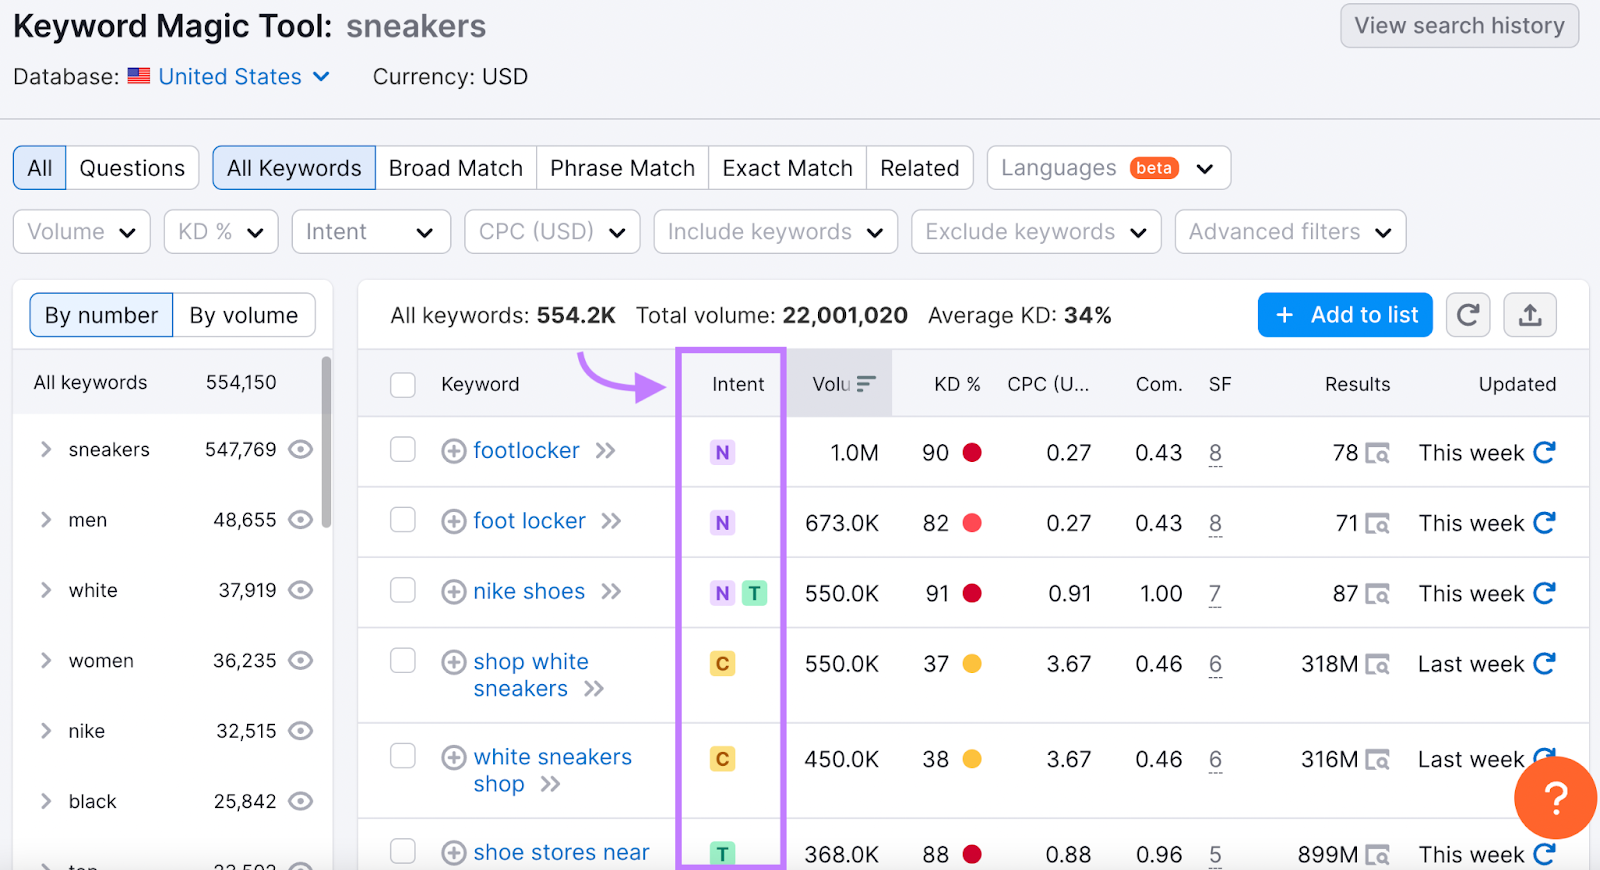 Keyword Magic Tool results for "sneakers" with intent column highlighted